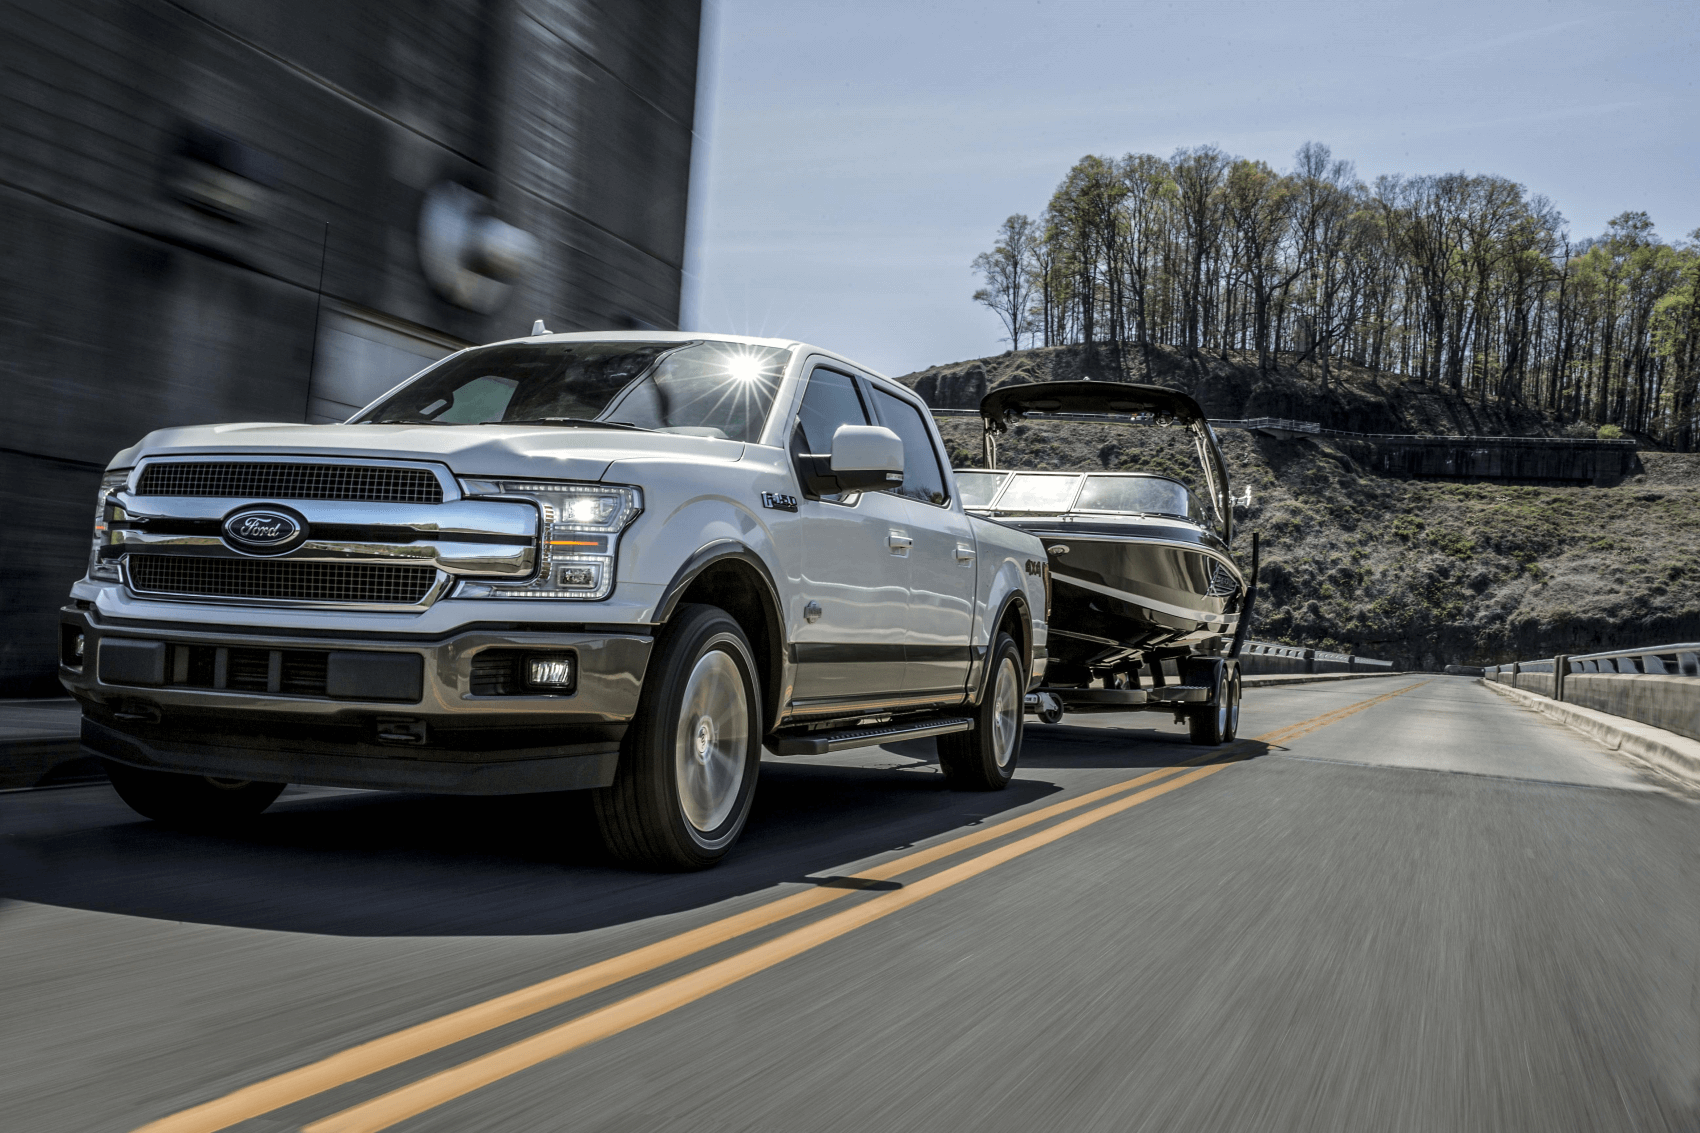 2019 Ford F-150 Silver Towing Boat Sunset Ford of Sumner